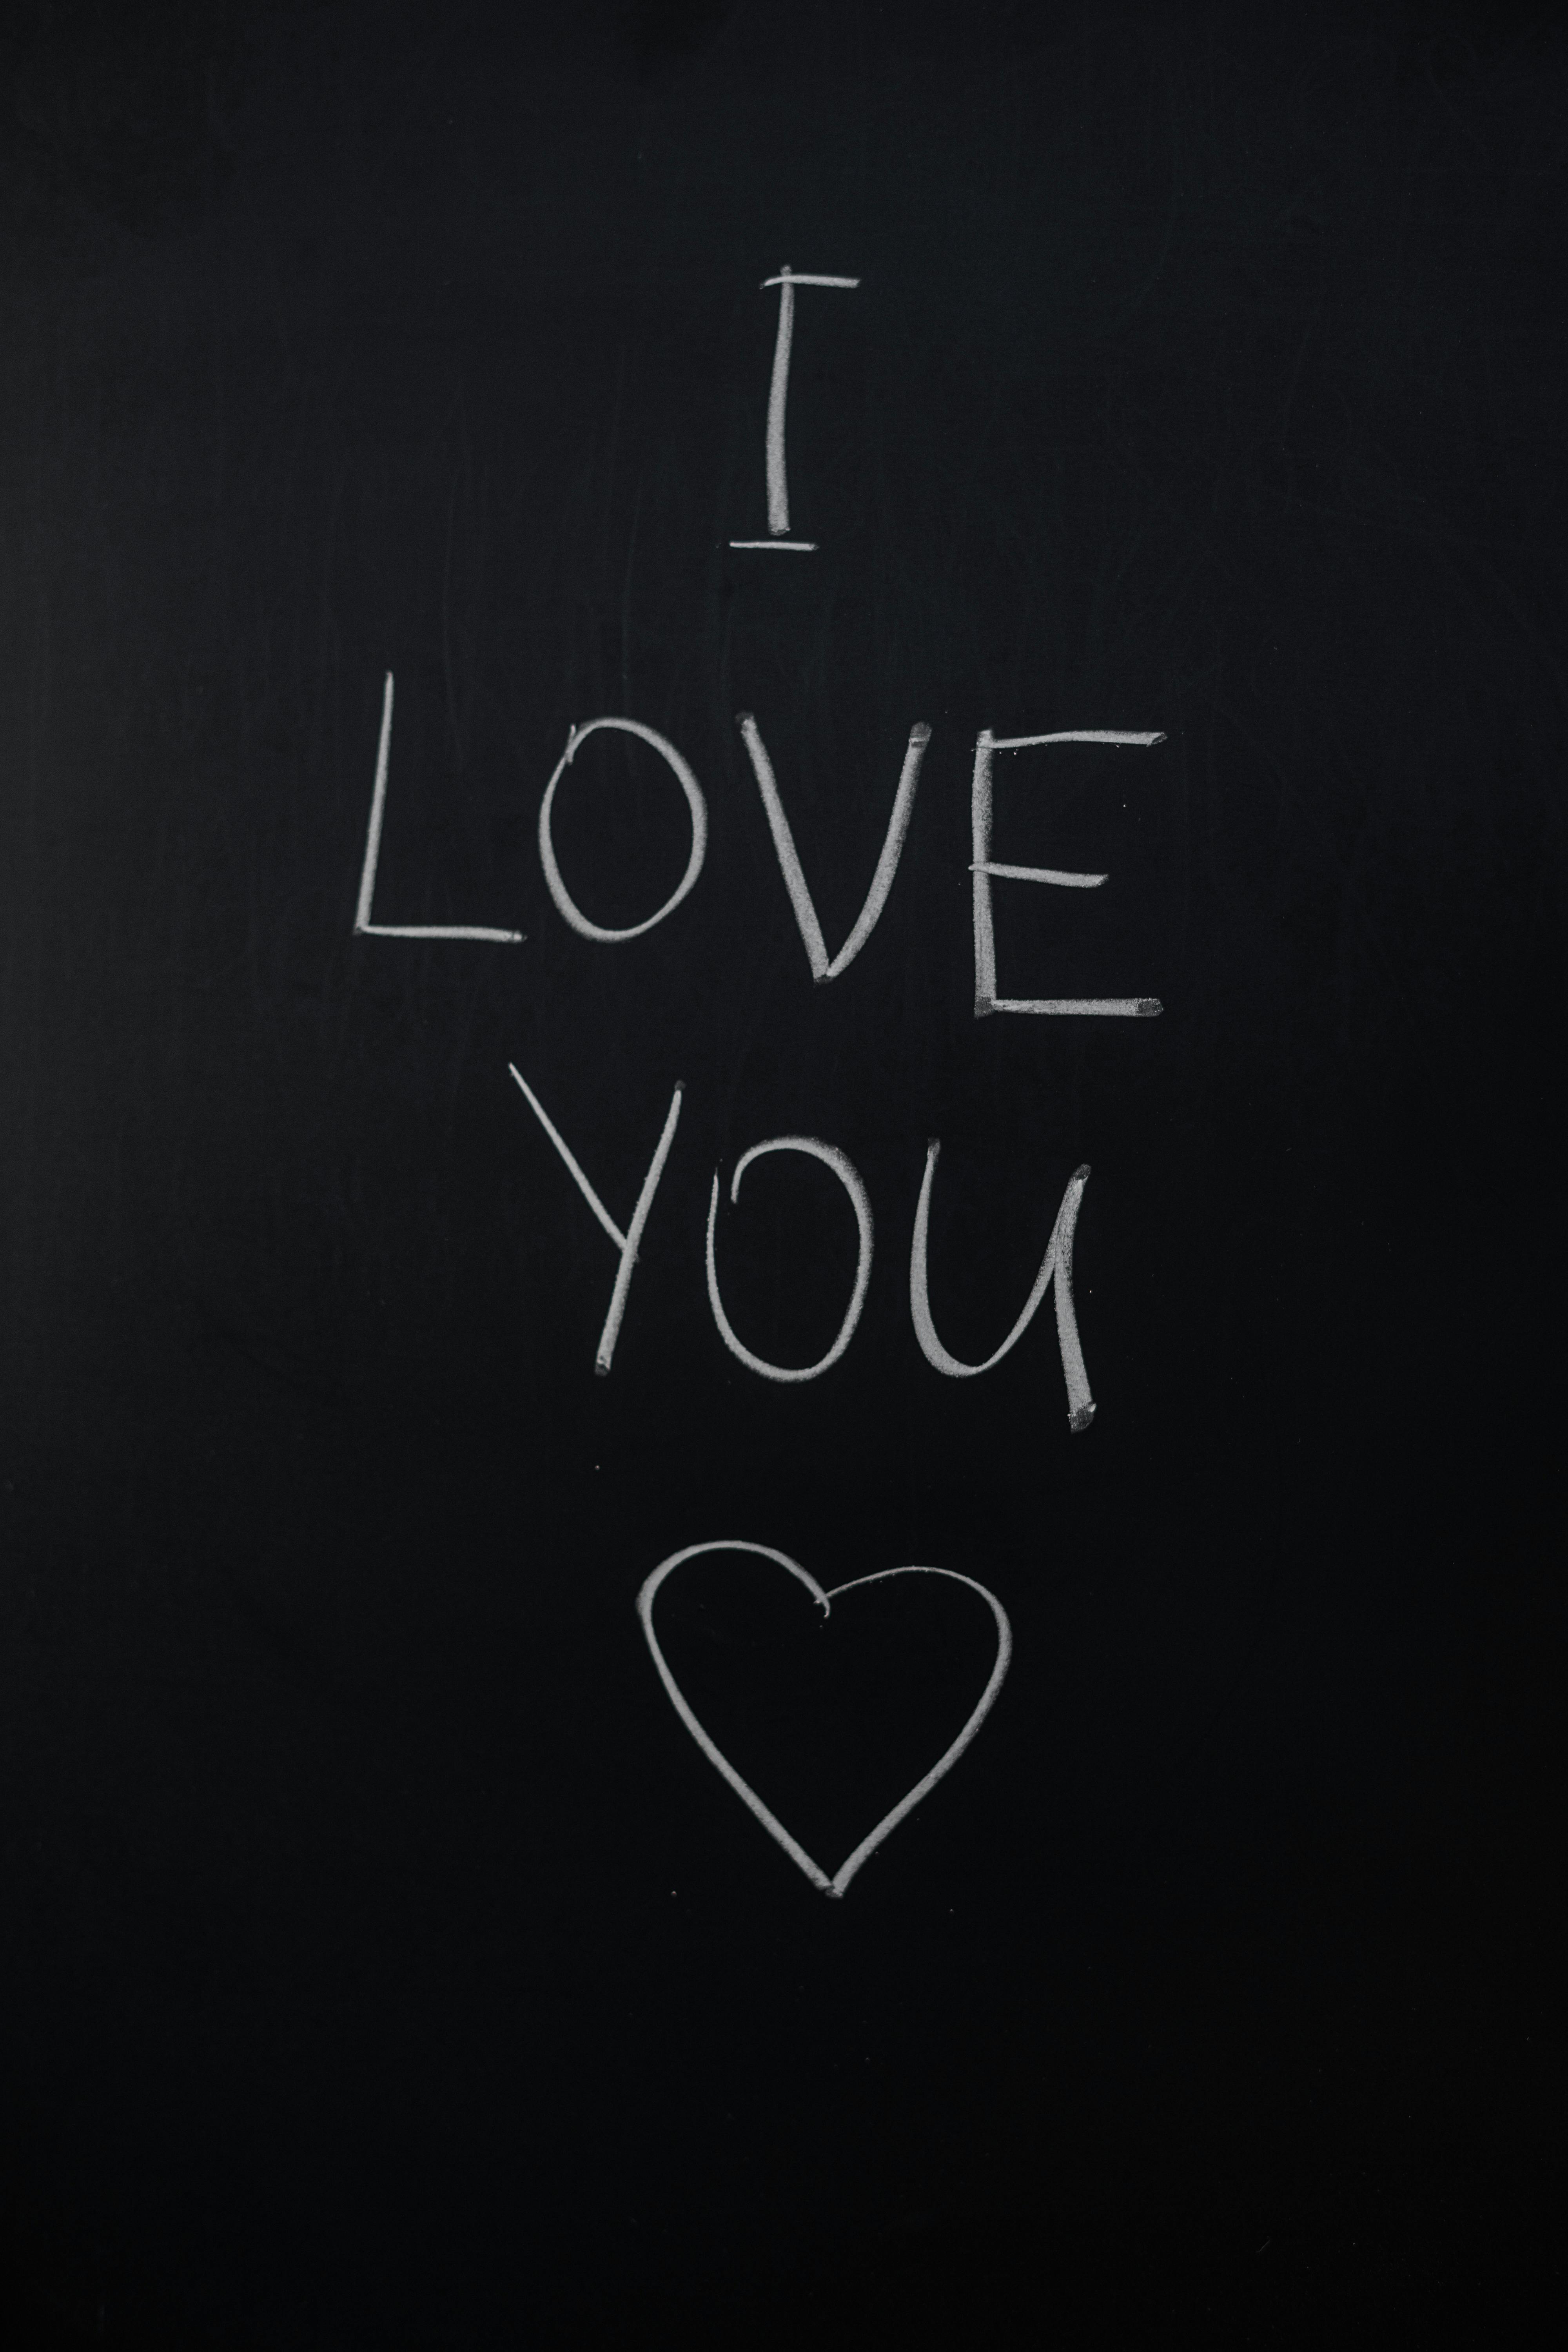 I Love You Written in Heart PNG Image - PurePNG | Free transparent CC0 PNG Image Library